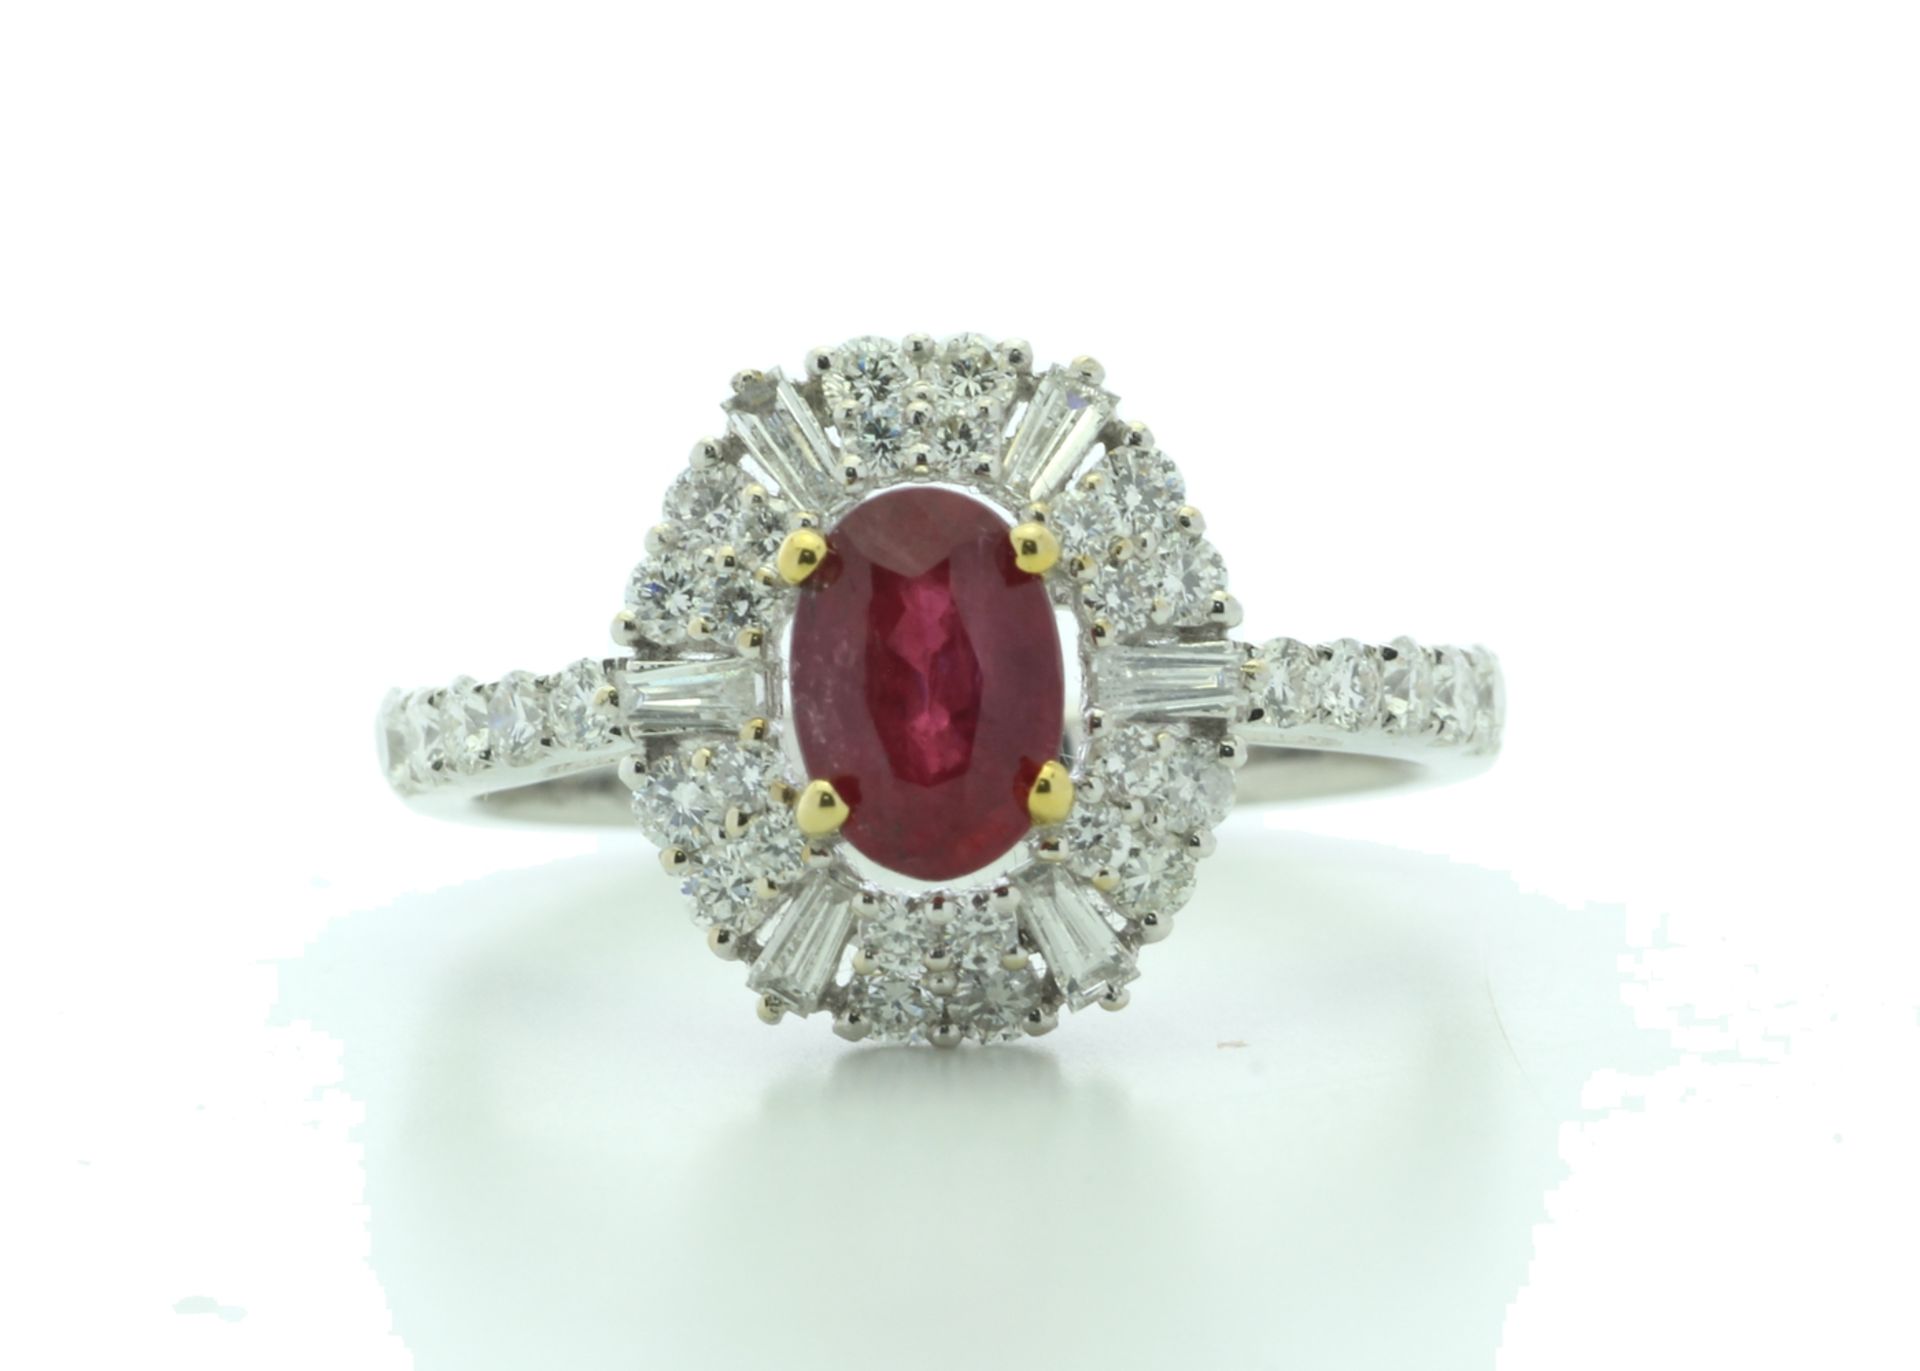 18ct White Gold Cluster Diamond And Ruby Ring (R0.86) 0.80 Carats - Valued by IDI £8,950.00 - 18ct